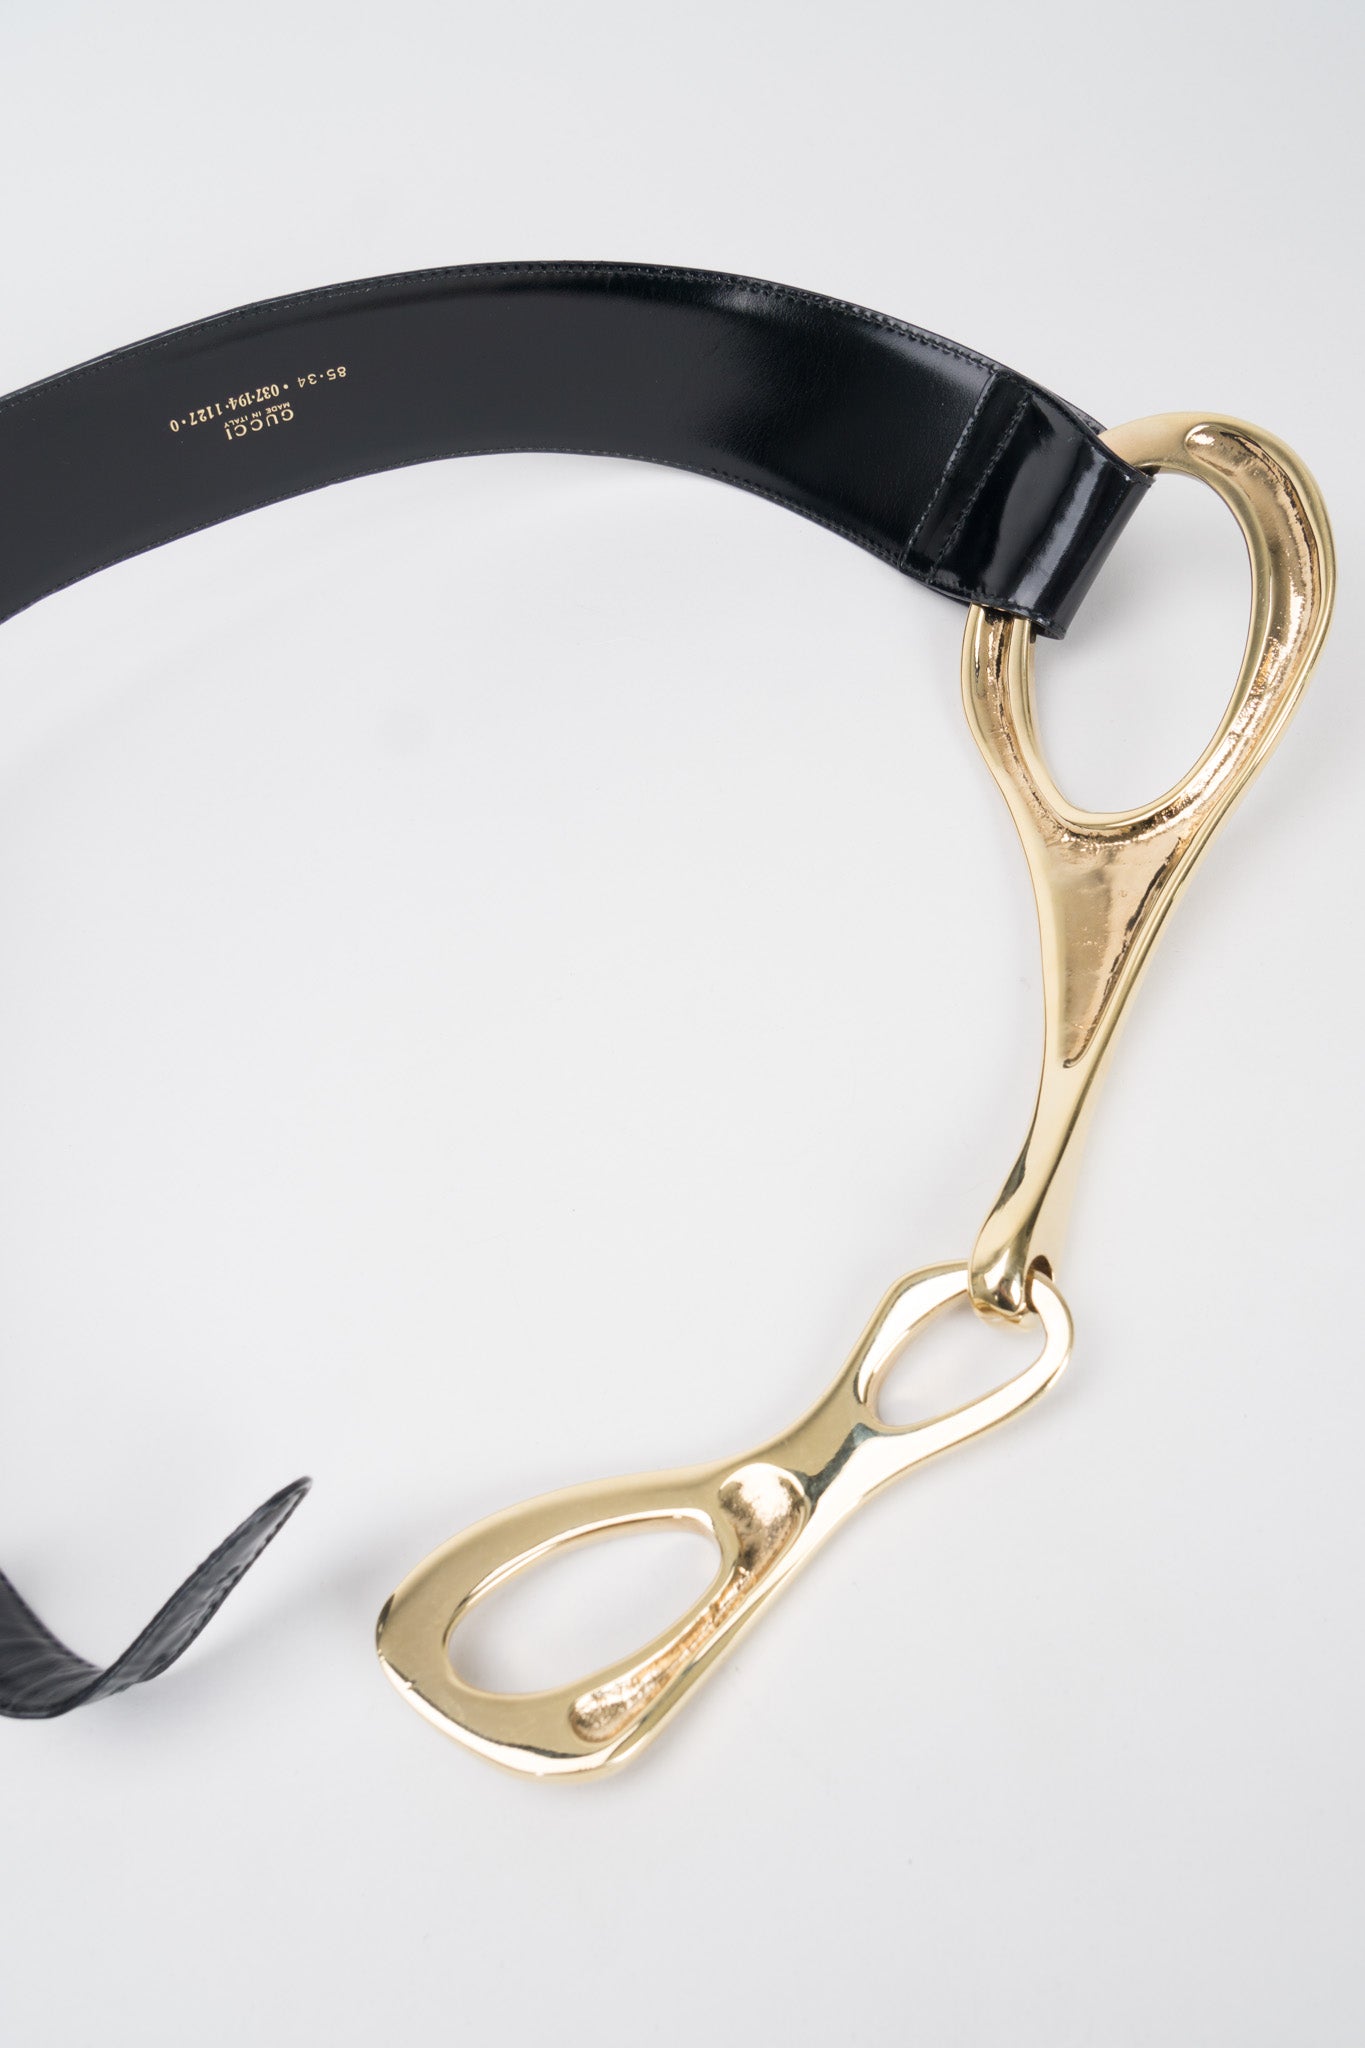 Gucci Tom Ford 1996 Leather Gold Gilt Buckle Belt Harness